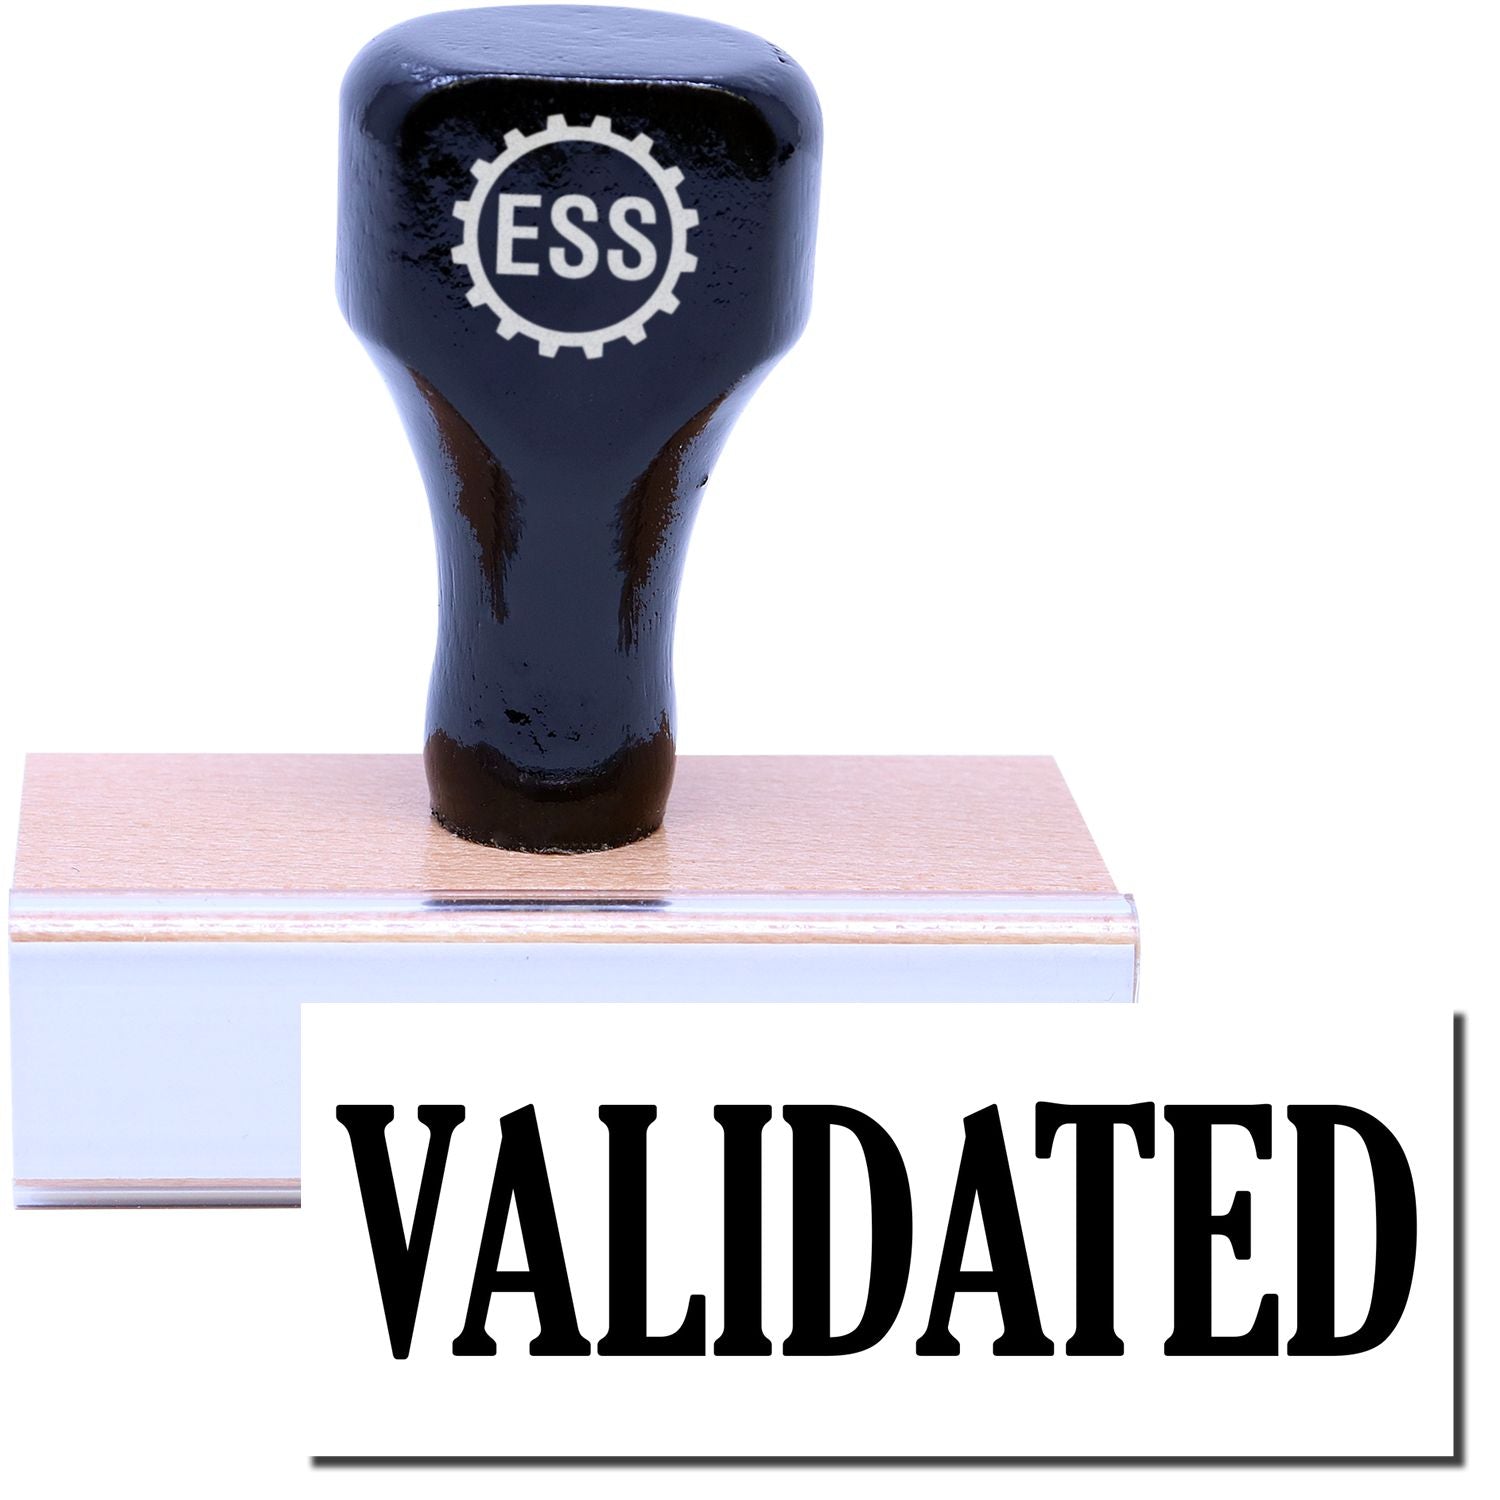 A stock office rubber stamp with a stamped image showing how the text "VALIDATED" is displayed after stamping.